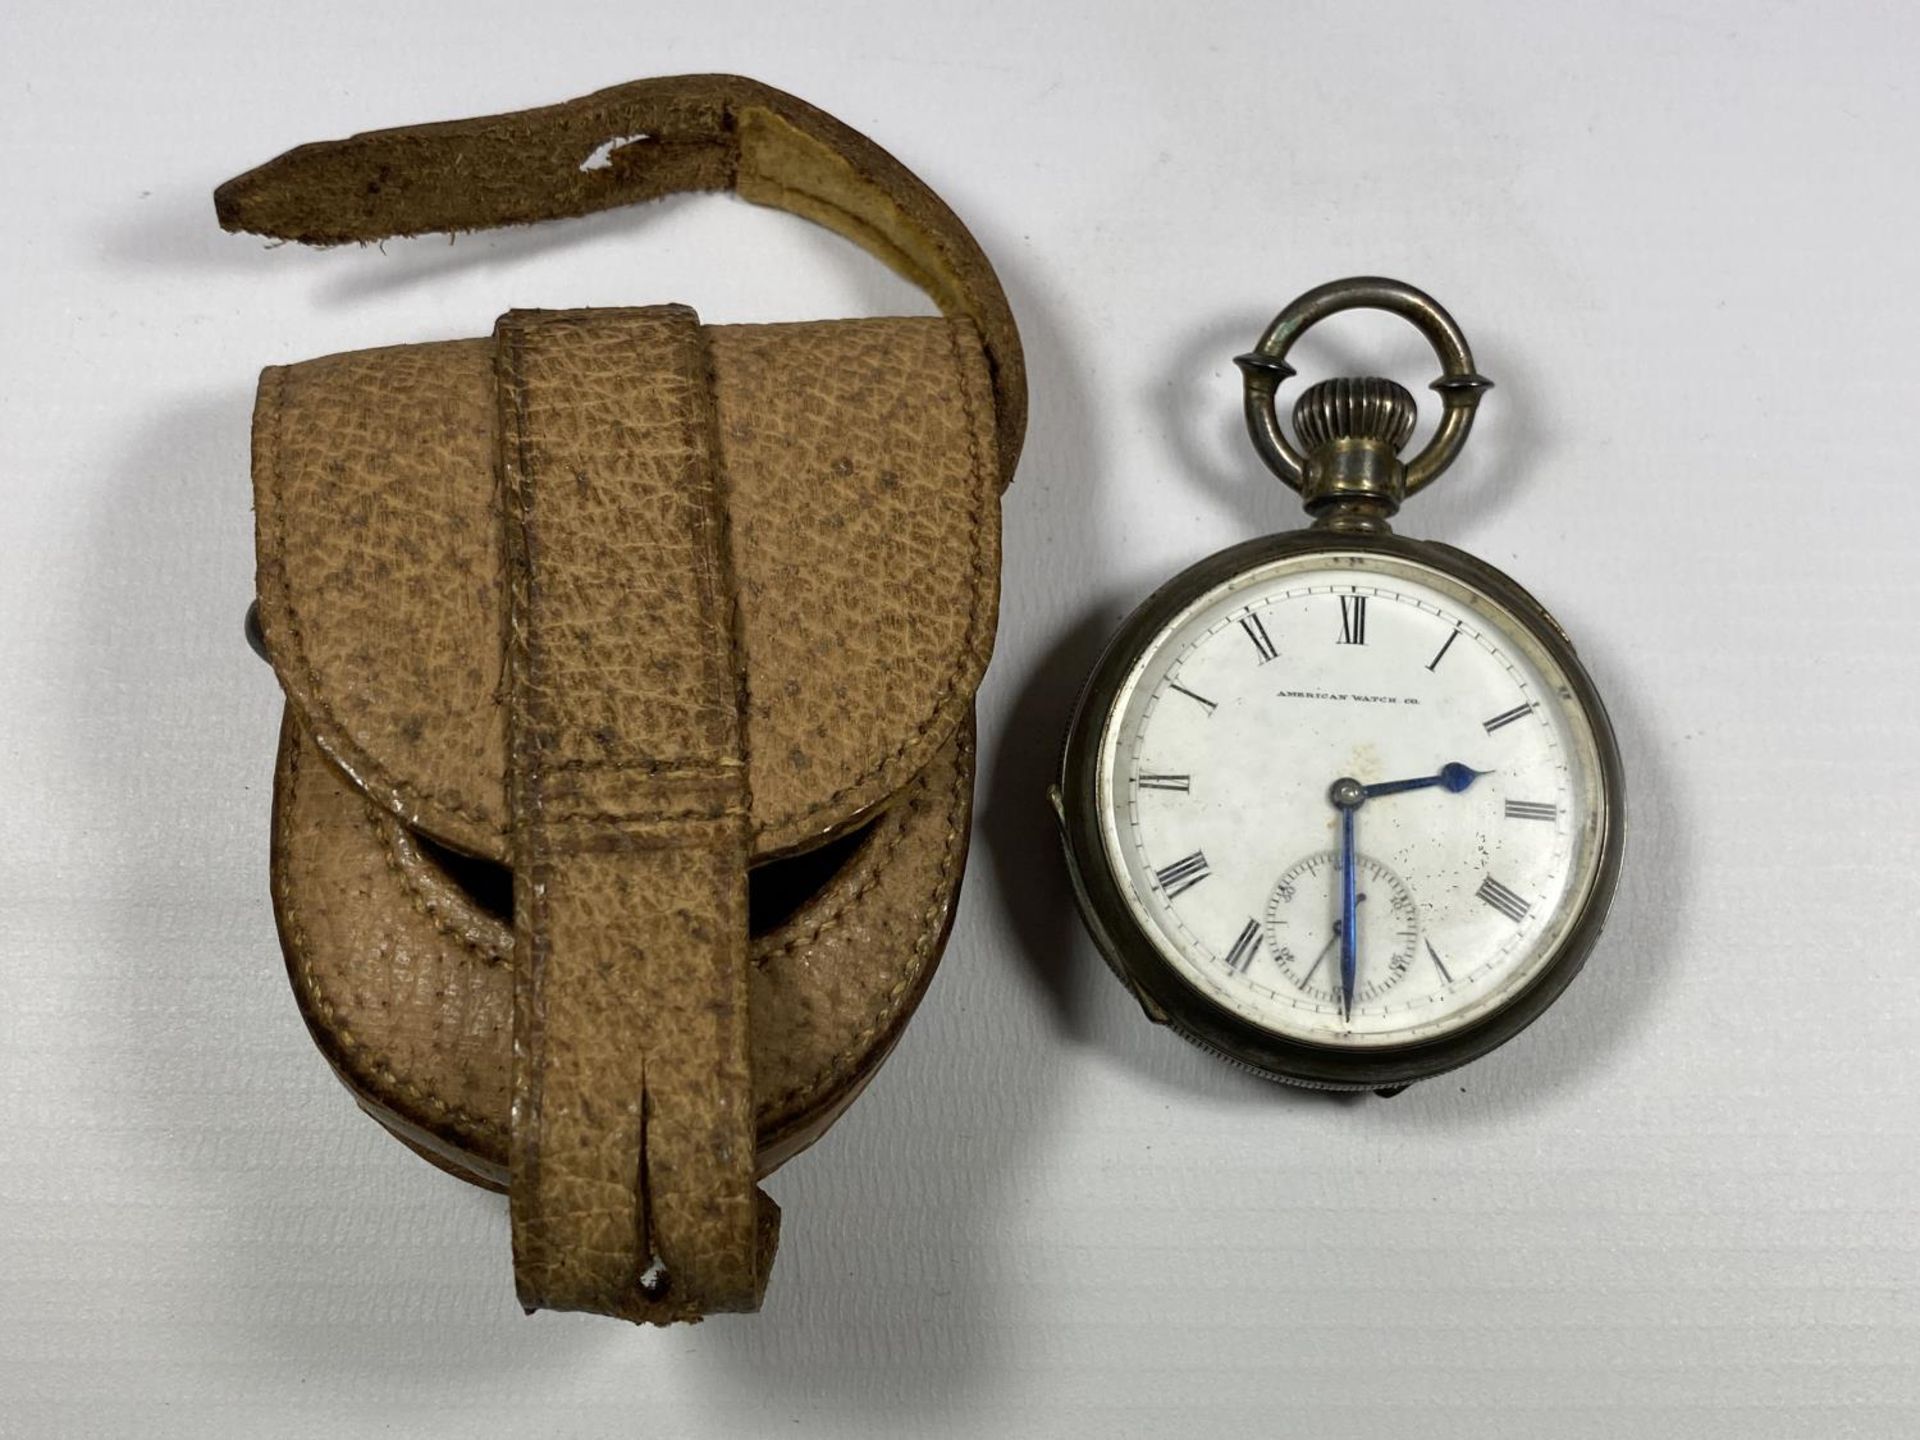 AN AMERICAN WATCH CO. WALTHAM MASS OPEN FACED CROWN WIND POCKET WATCH IN LEATHER POUCH